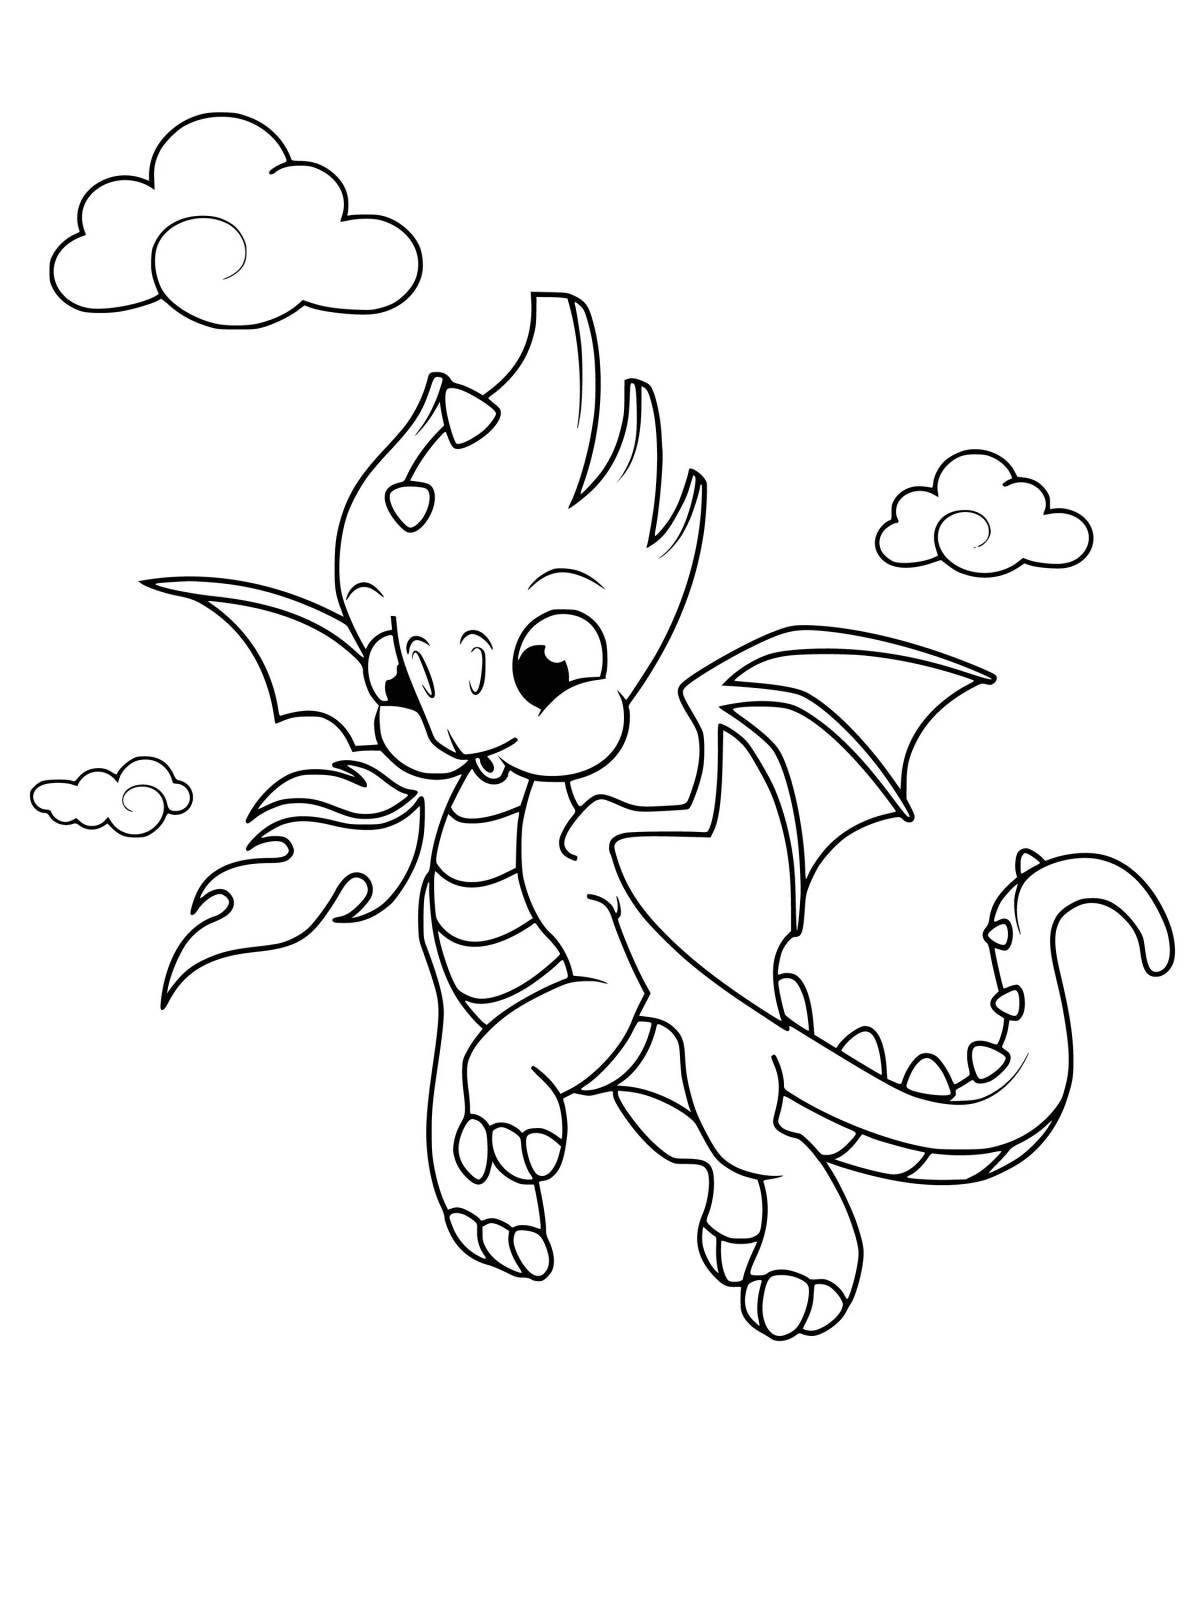 Playful coloring dragons for kids